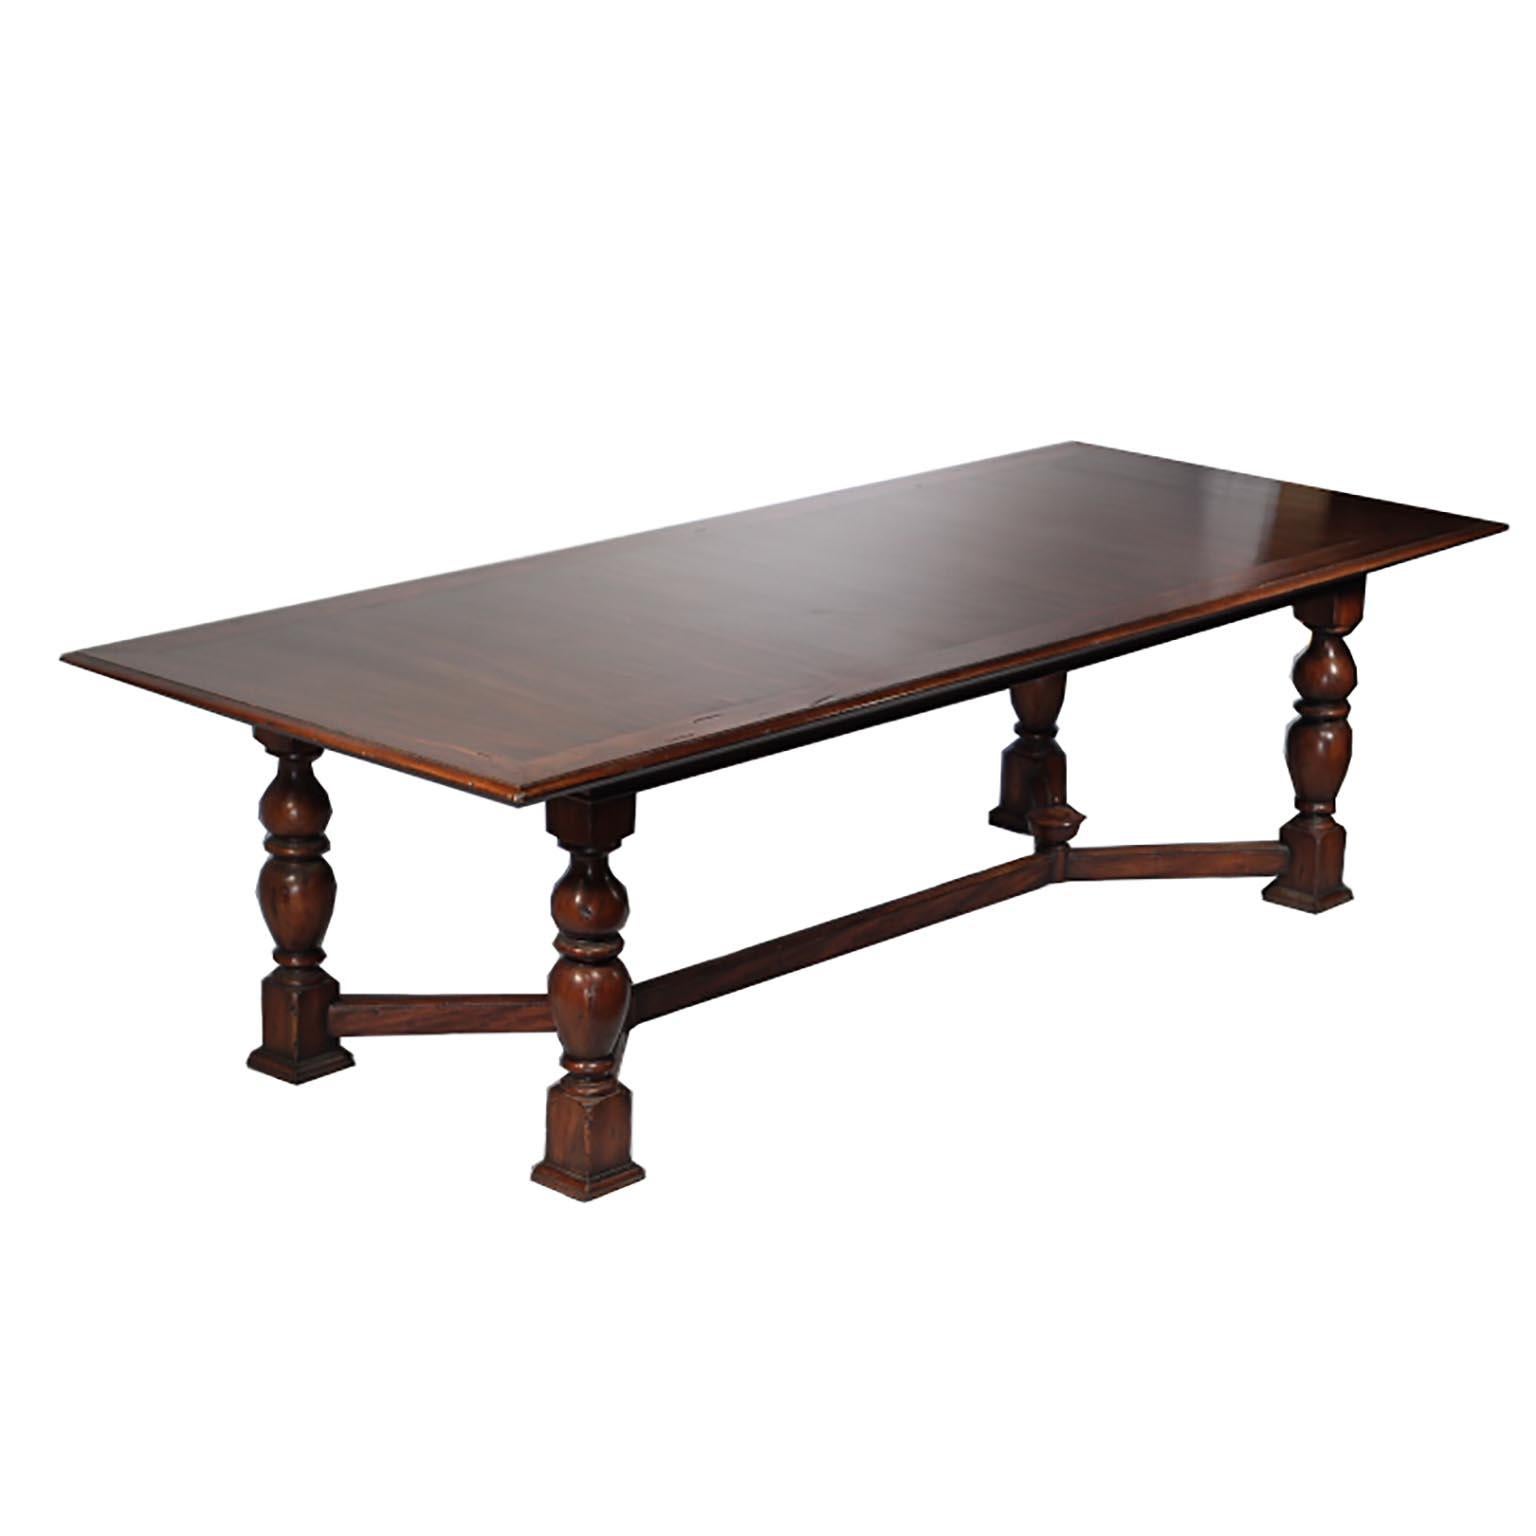 This is an original Alfonso Marina hand crafted dining table with hand carved legs and rich, Spanish Cedarwood grain throughout the piece. This piece is very large at 9 feet in length.
 